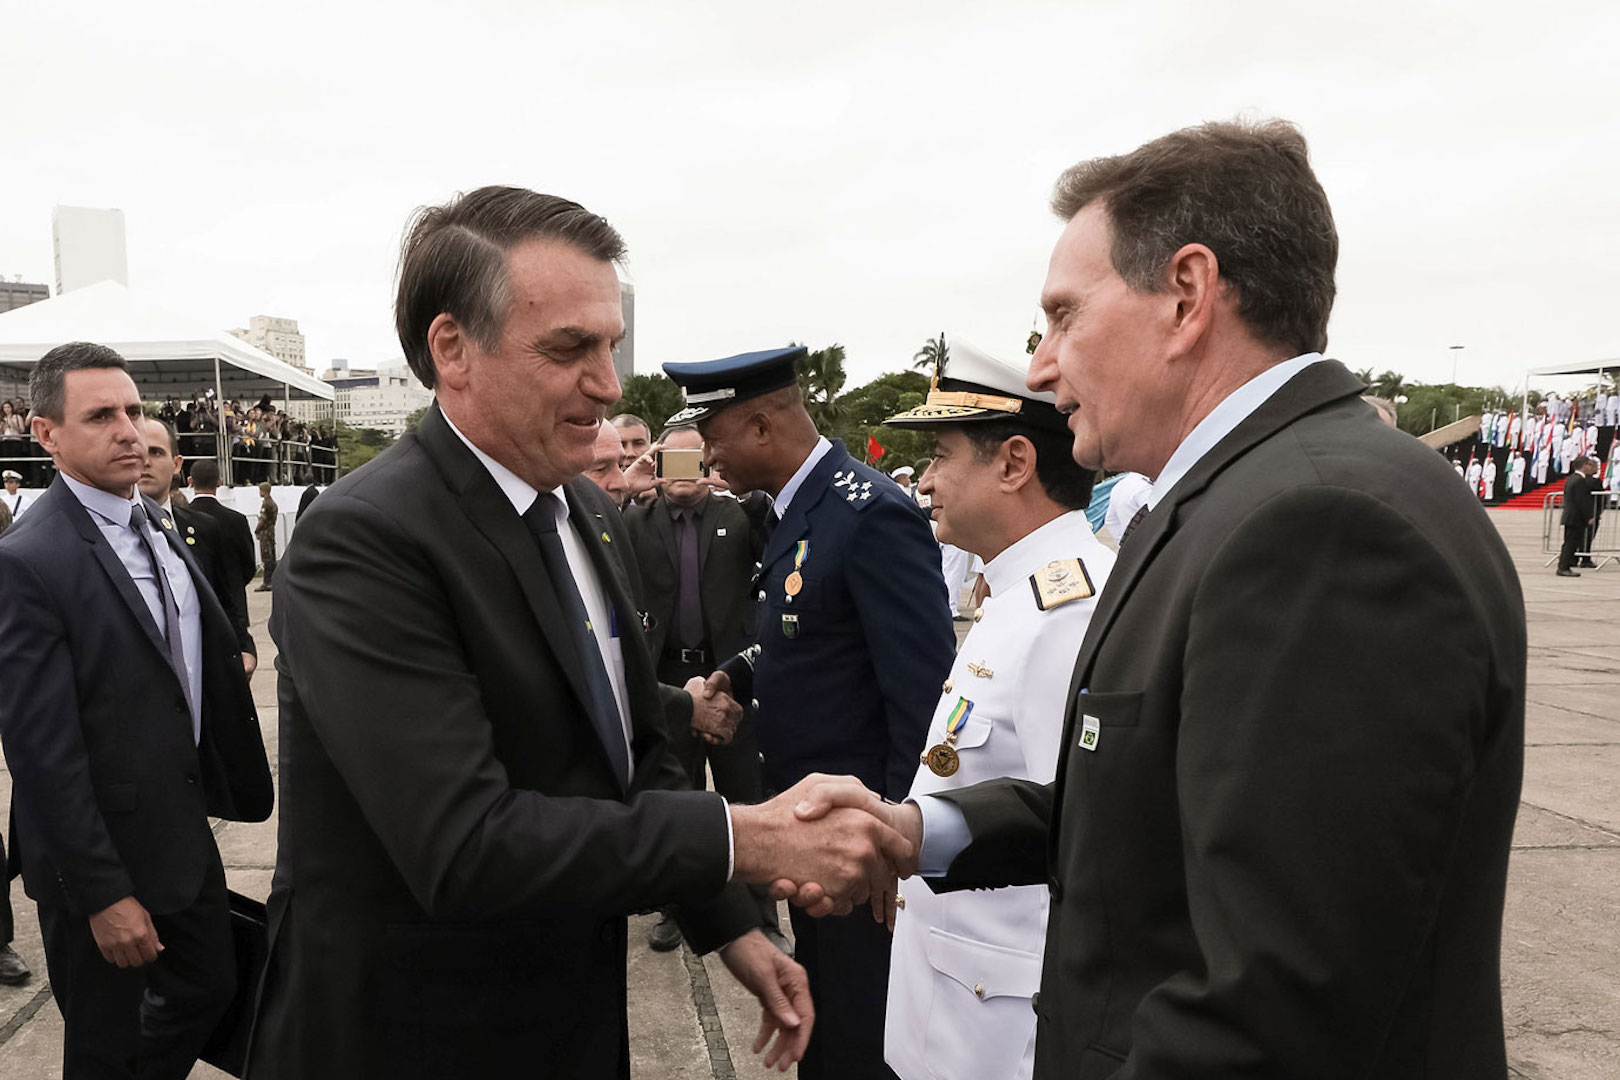 Mayor Crivella is supporting President Bolsonaro's criticism of quarantine in hopes of winning reelection in October.